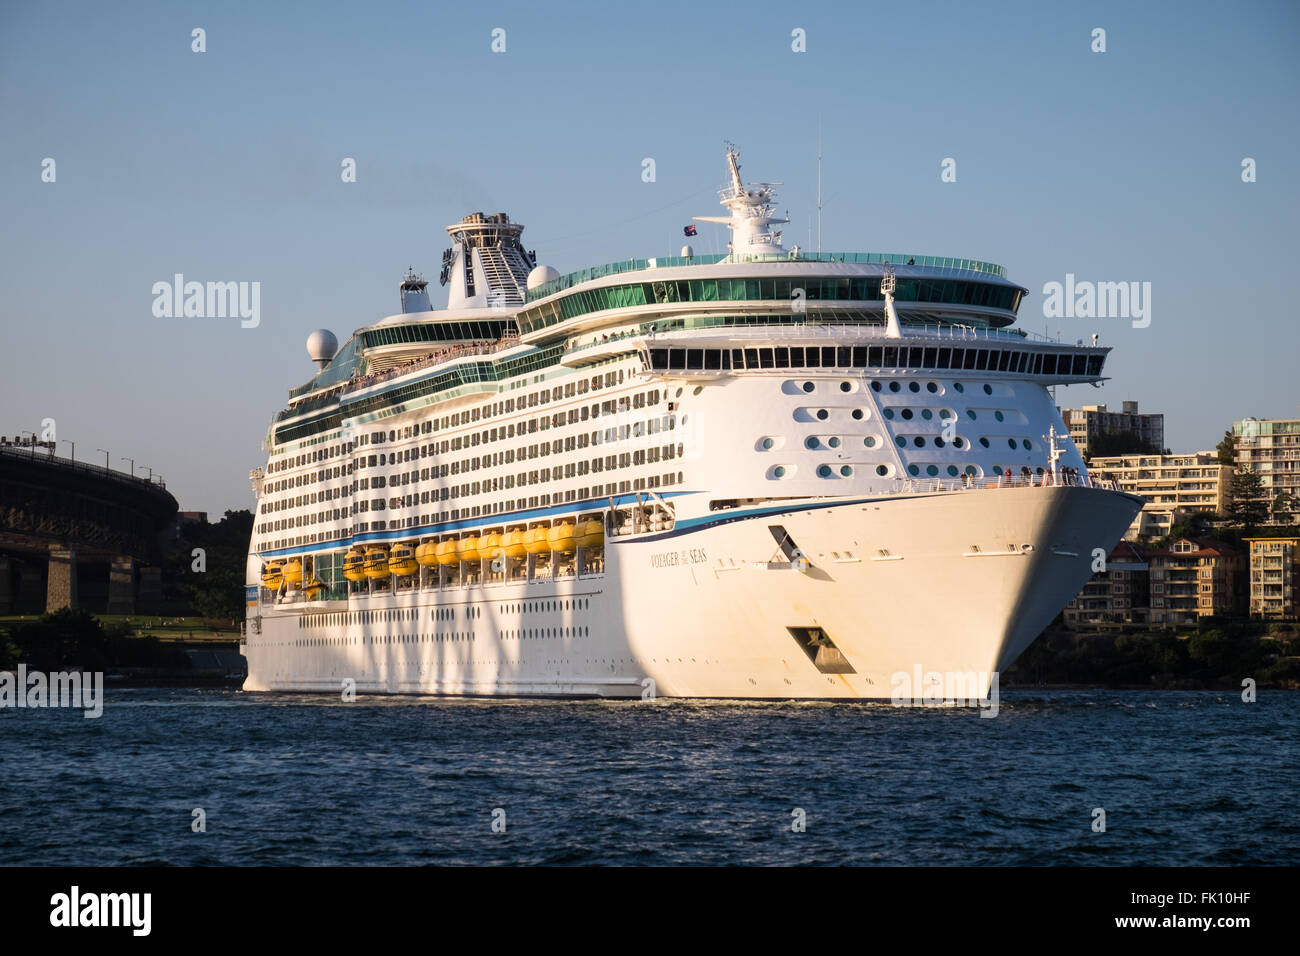 Royal Caribbean cruise liner, Voyager of the Seas, departs Sydney Harbour Stock Photo